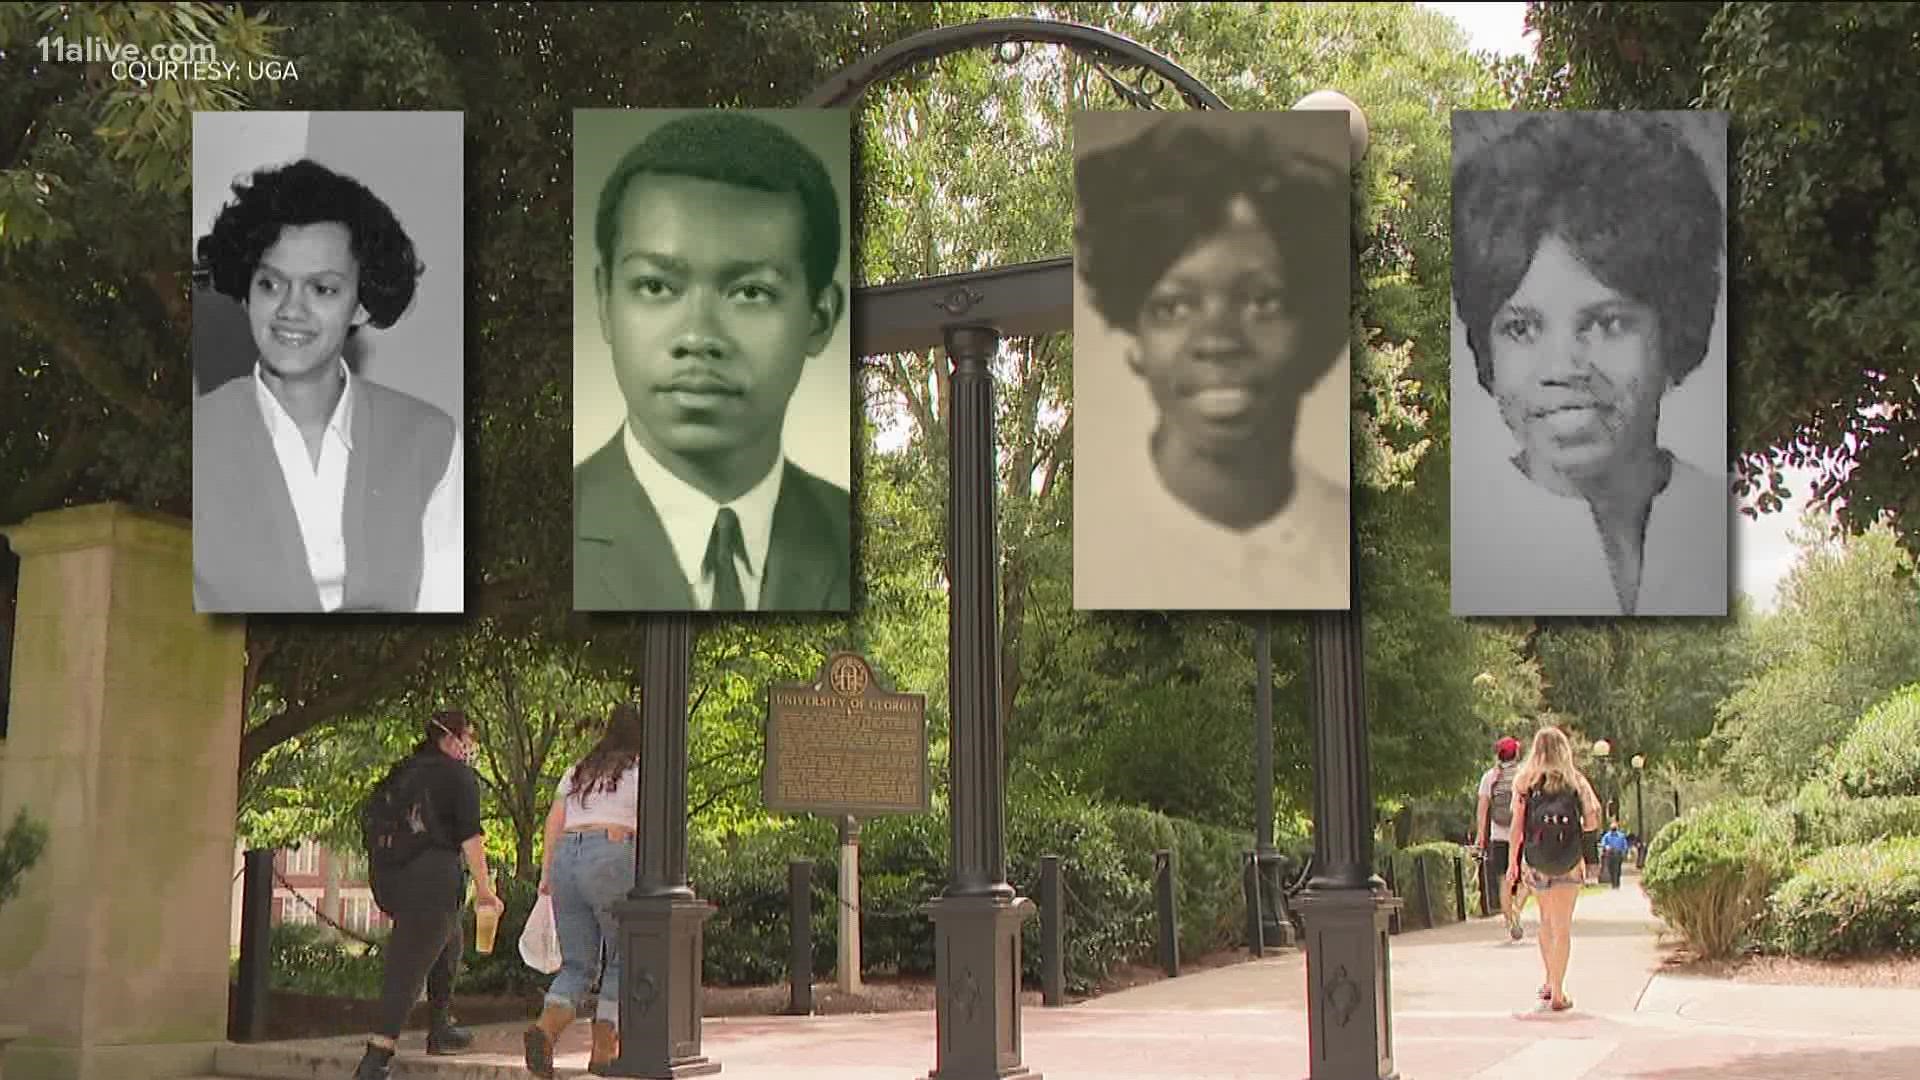 The university previously named a building after its first two Black students. Now, UGA is set to celebrate more of its groundbreaking African American Alumni.